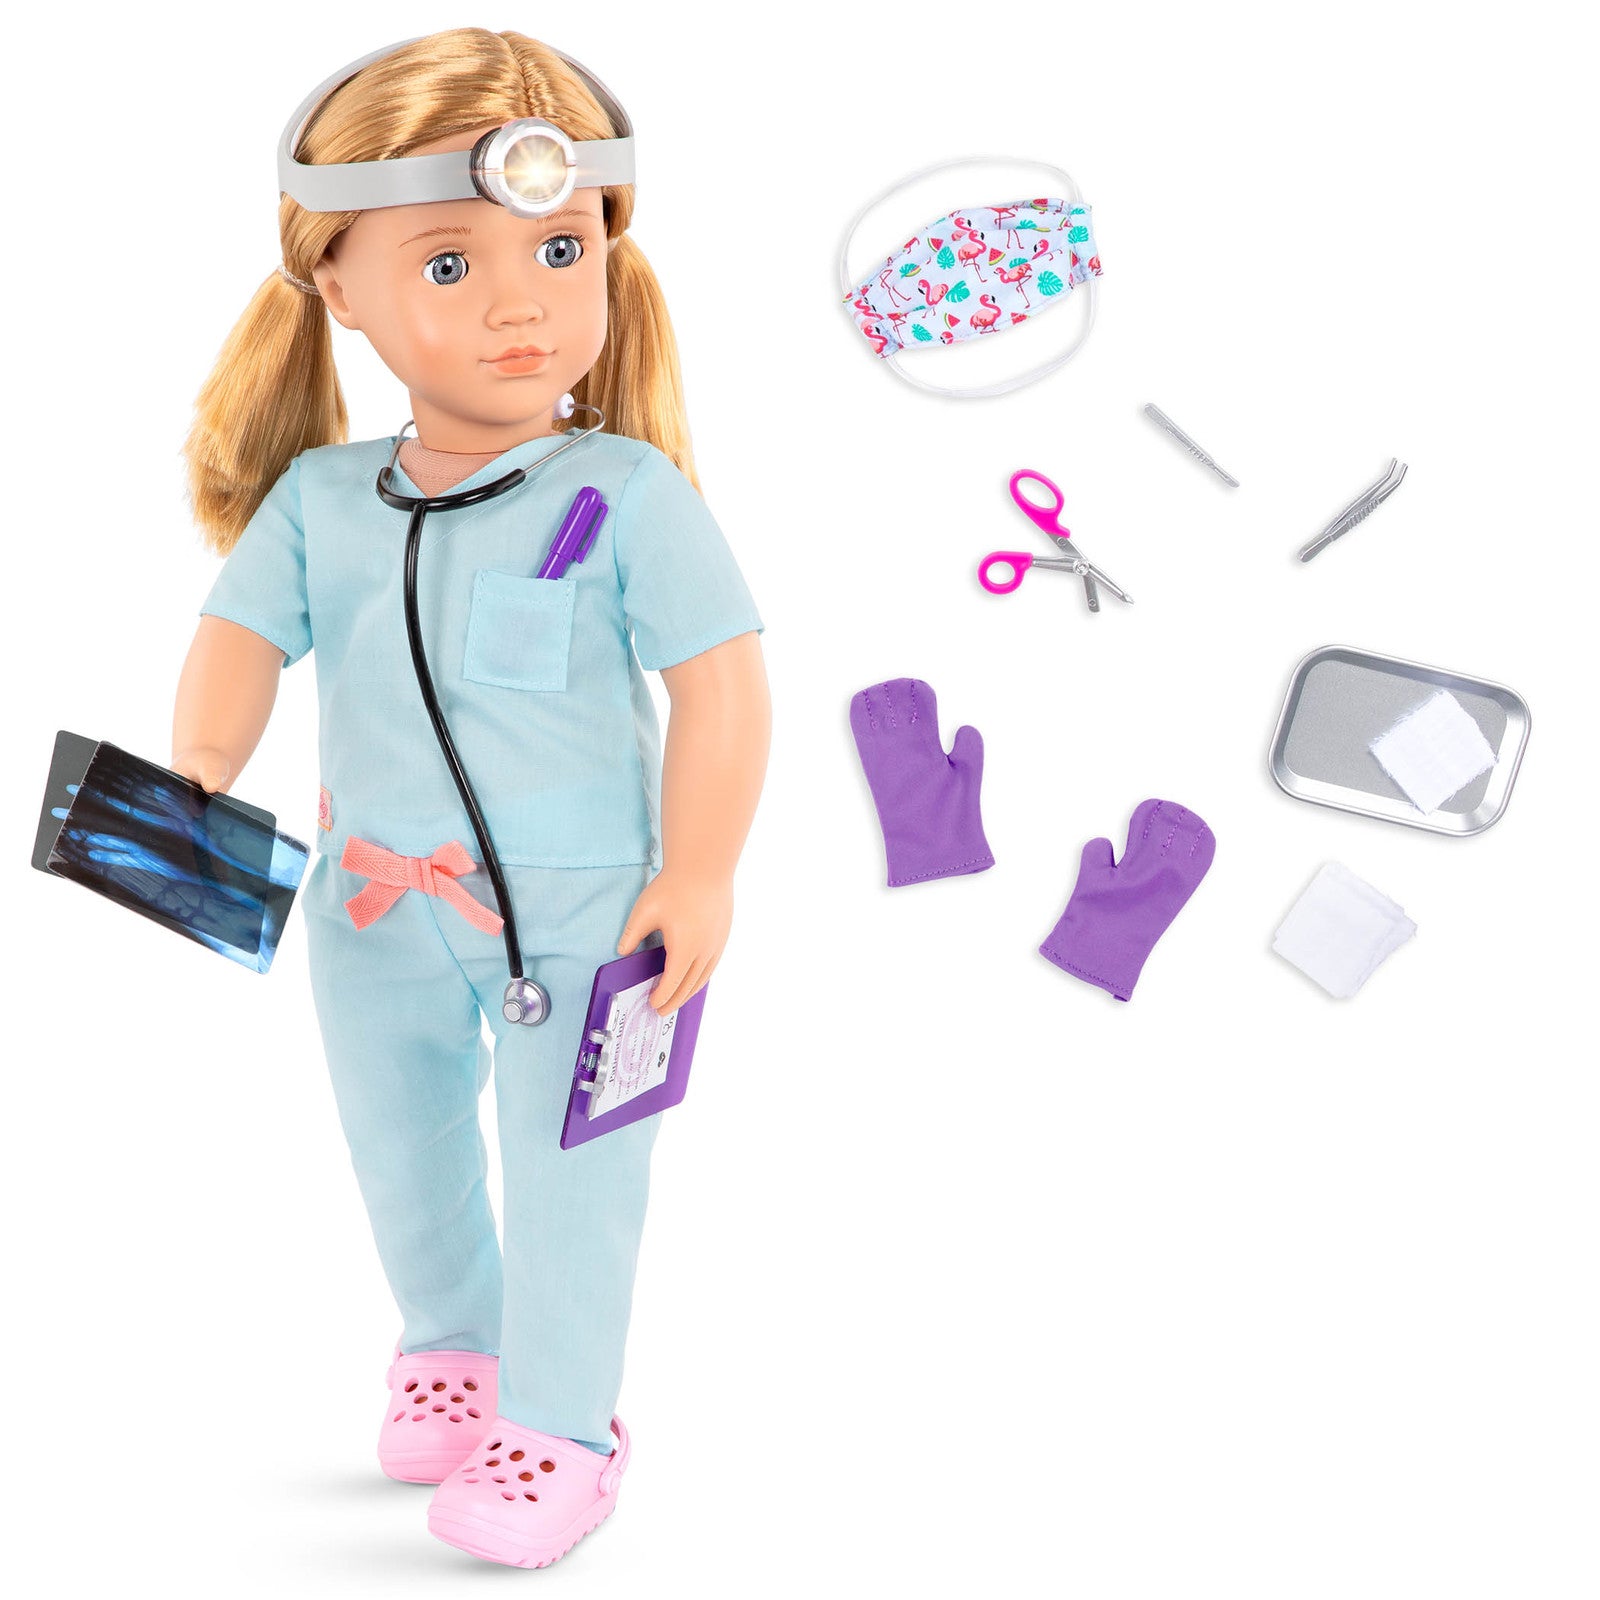 Our Generation: 18" Activity Doll - Surgeon Tonia